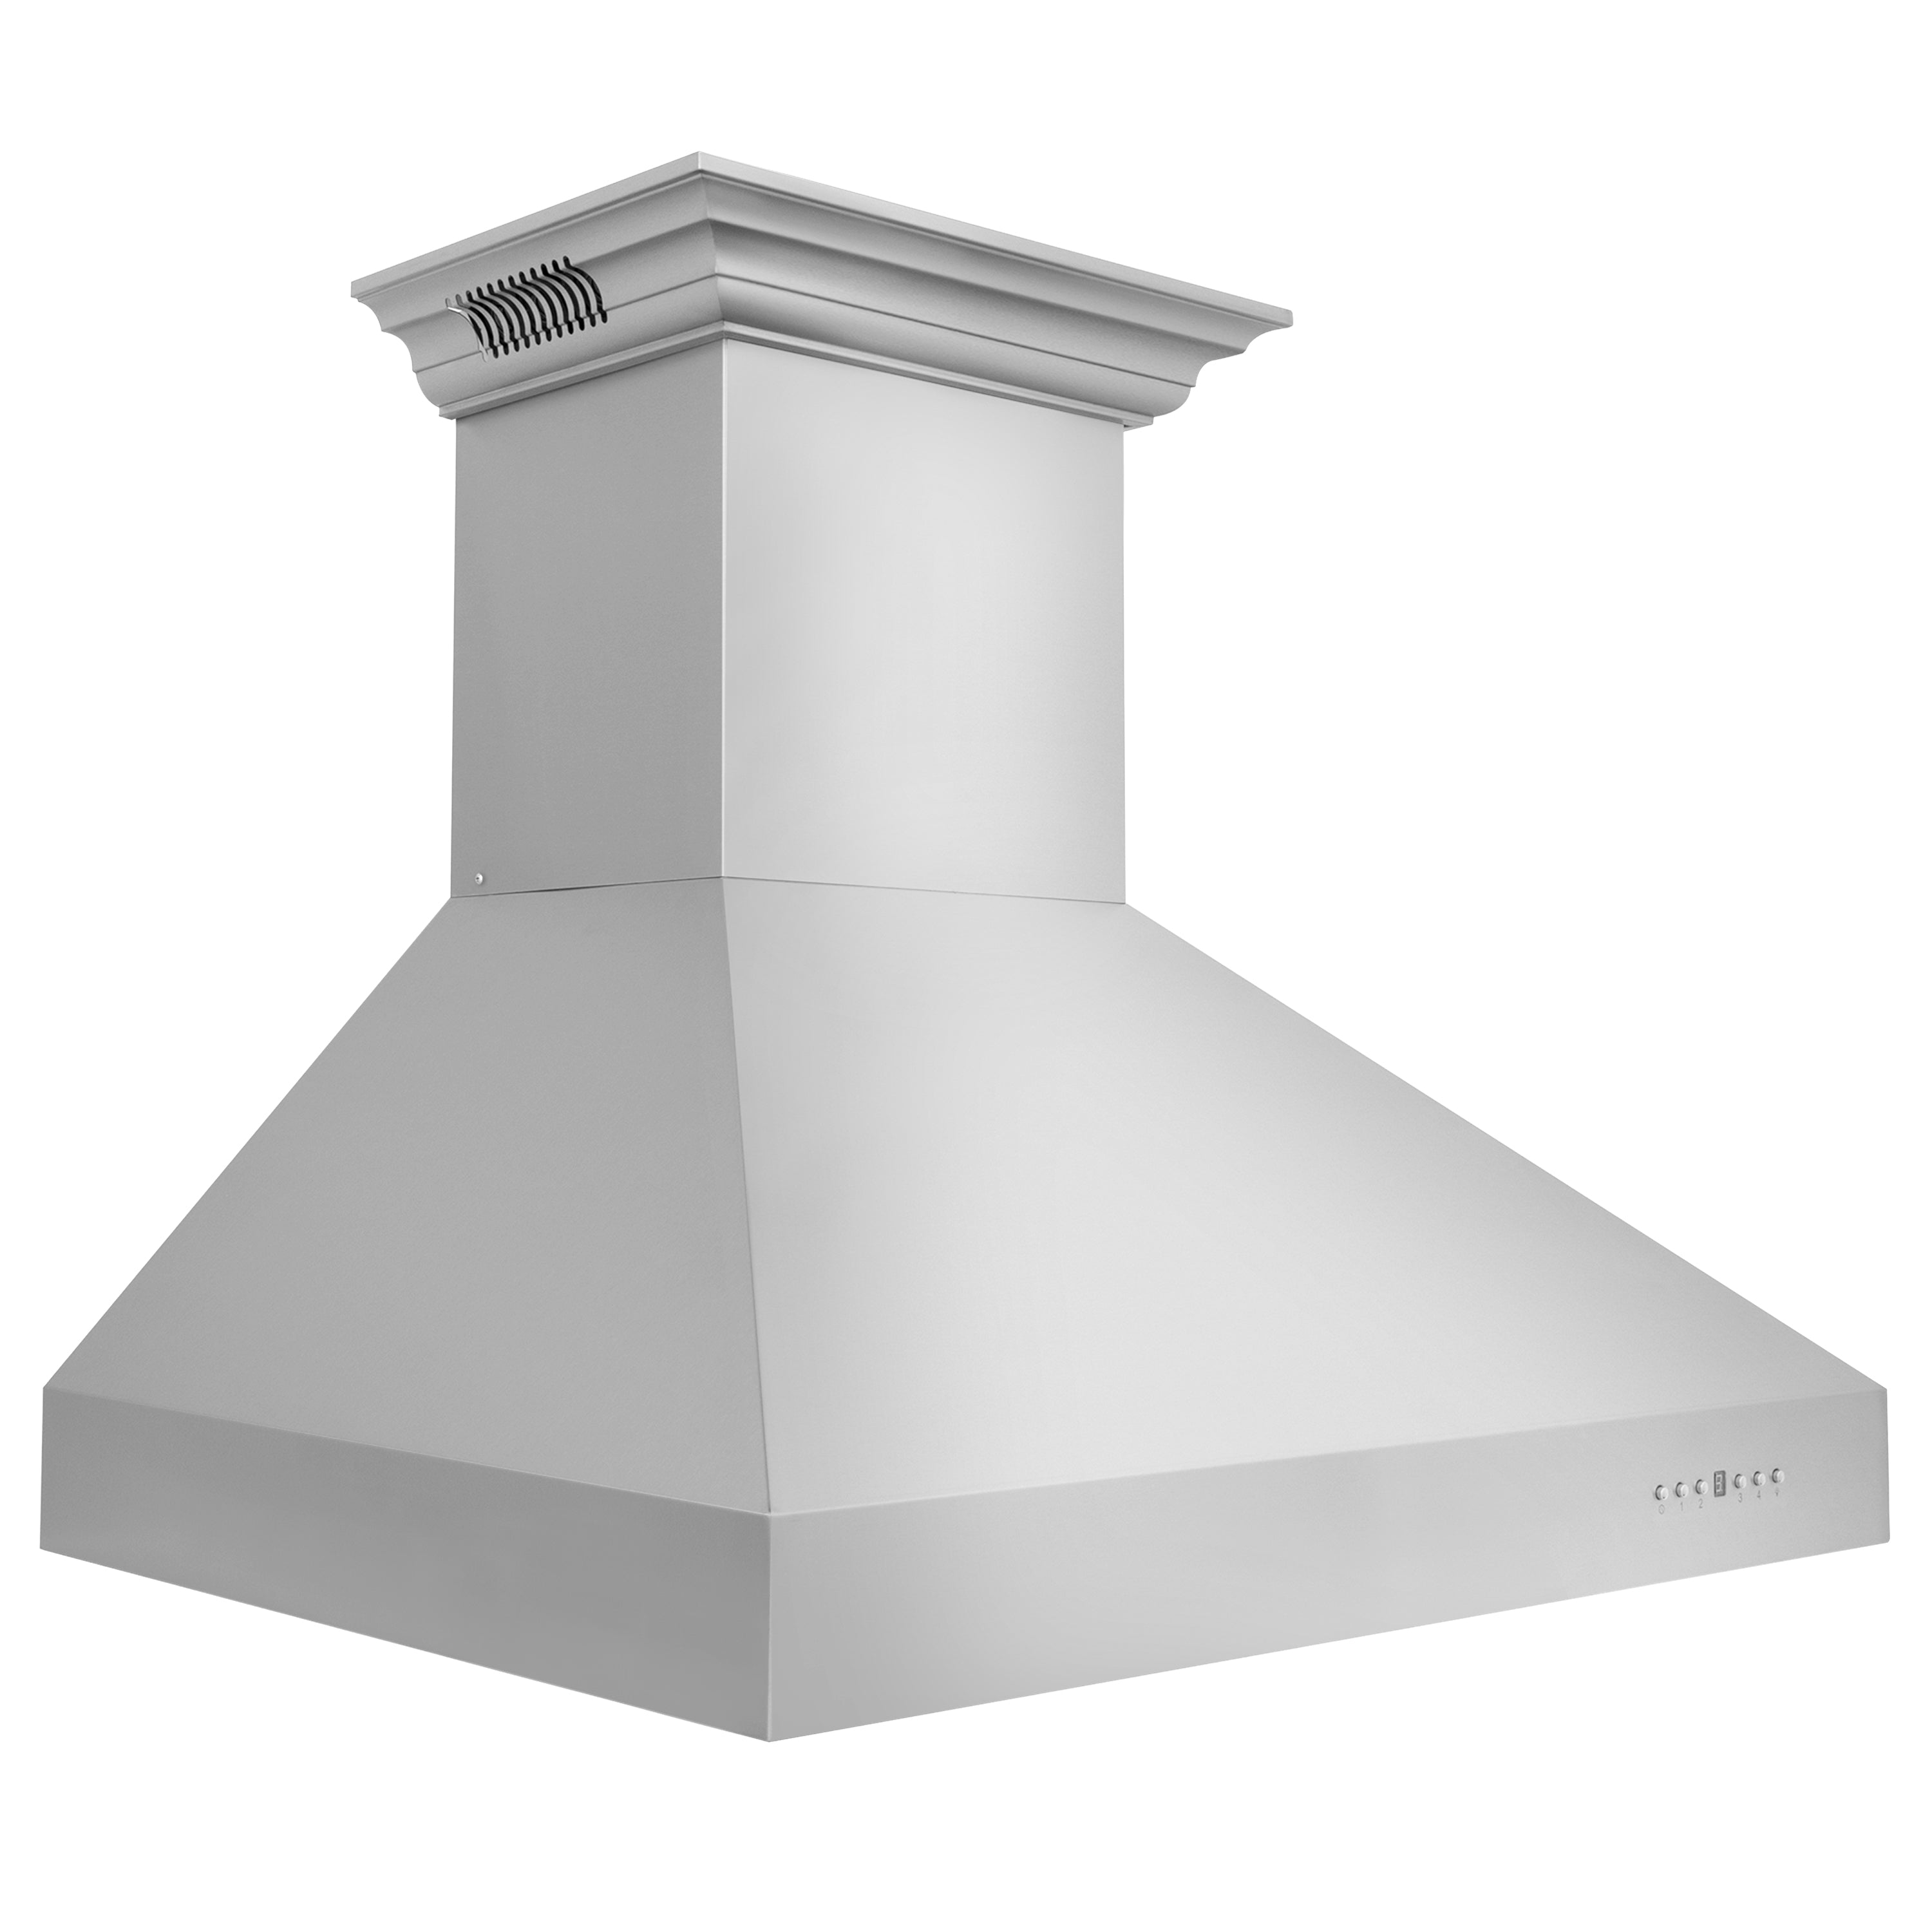 60" ZLINE CrownSound‚Äö√†√∂‚Äö√†√ª Ducted Vent Professional Wall Mount Range Hood in Stainless Steel with Built-in Bluetooth Speakers (697CRN-BT-60)